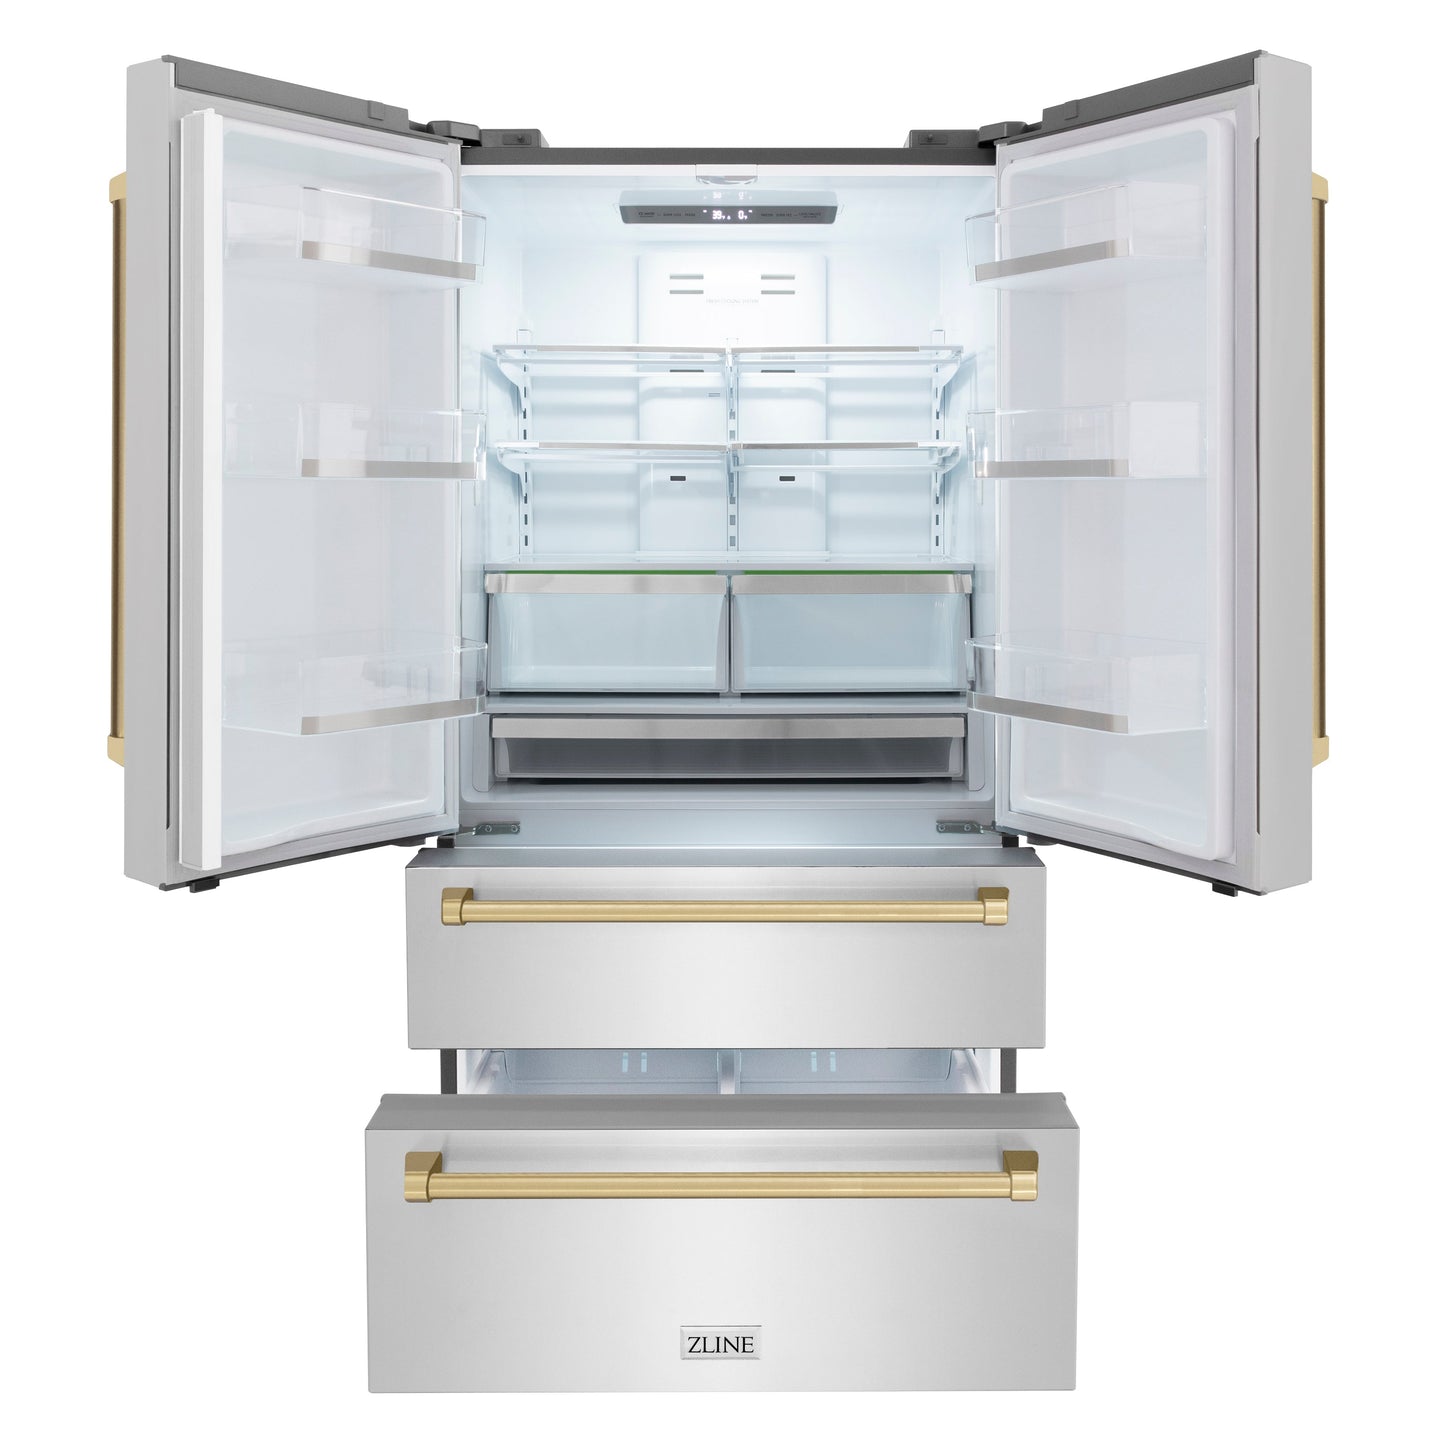 ZLINE 36 In. Autograph 22.5 cu. ft. Refrigerator with Ice Maker in Fingerprint Resistant Stainless Steel and Champagne Bronze Accents, RFMZ-36-CB